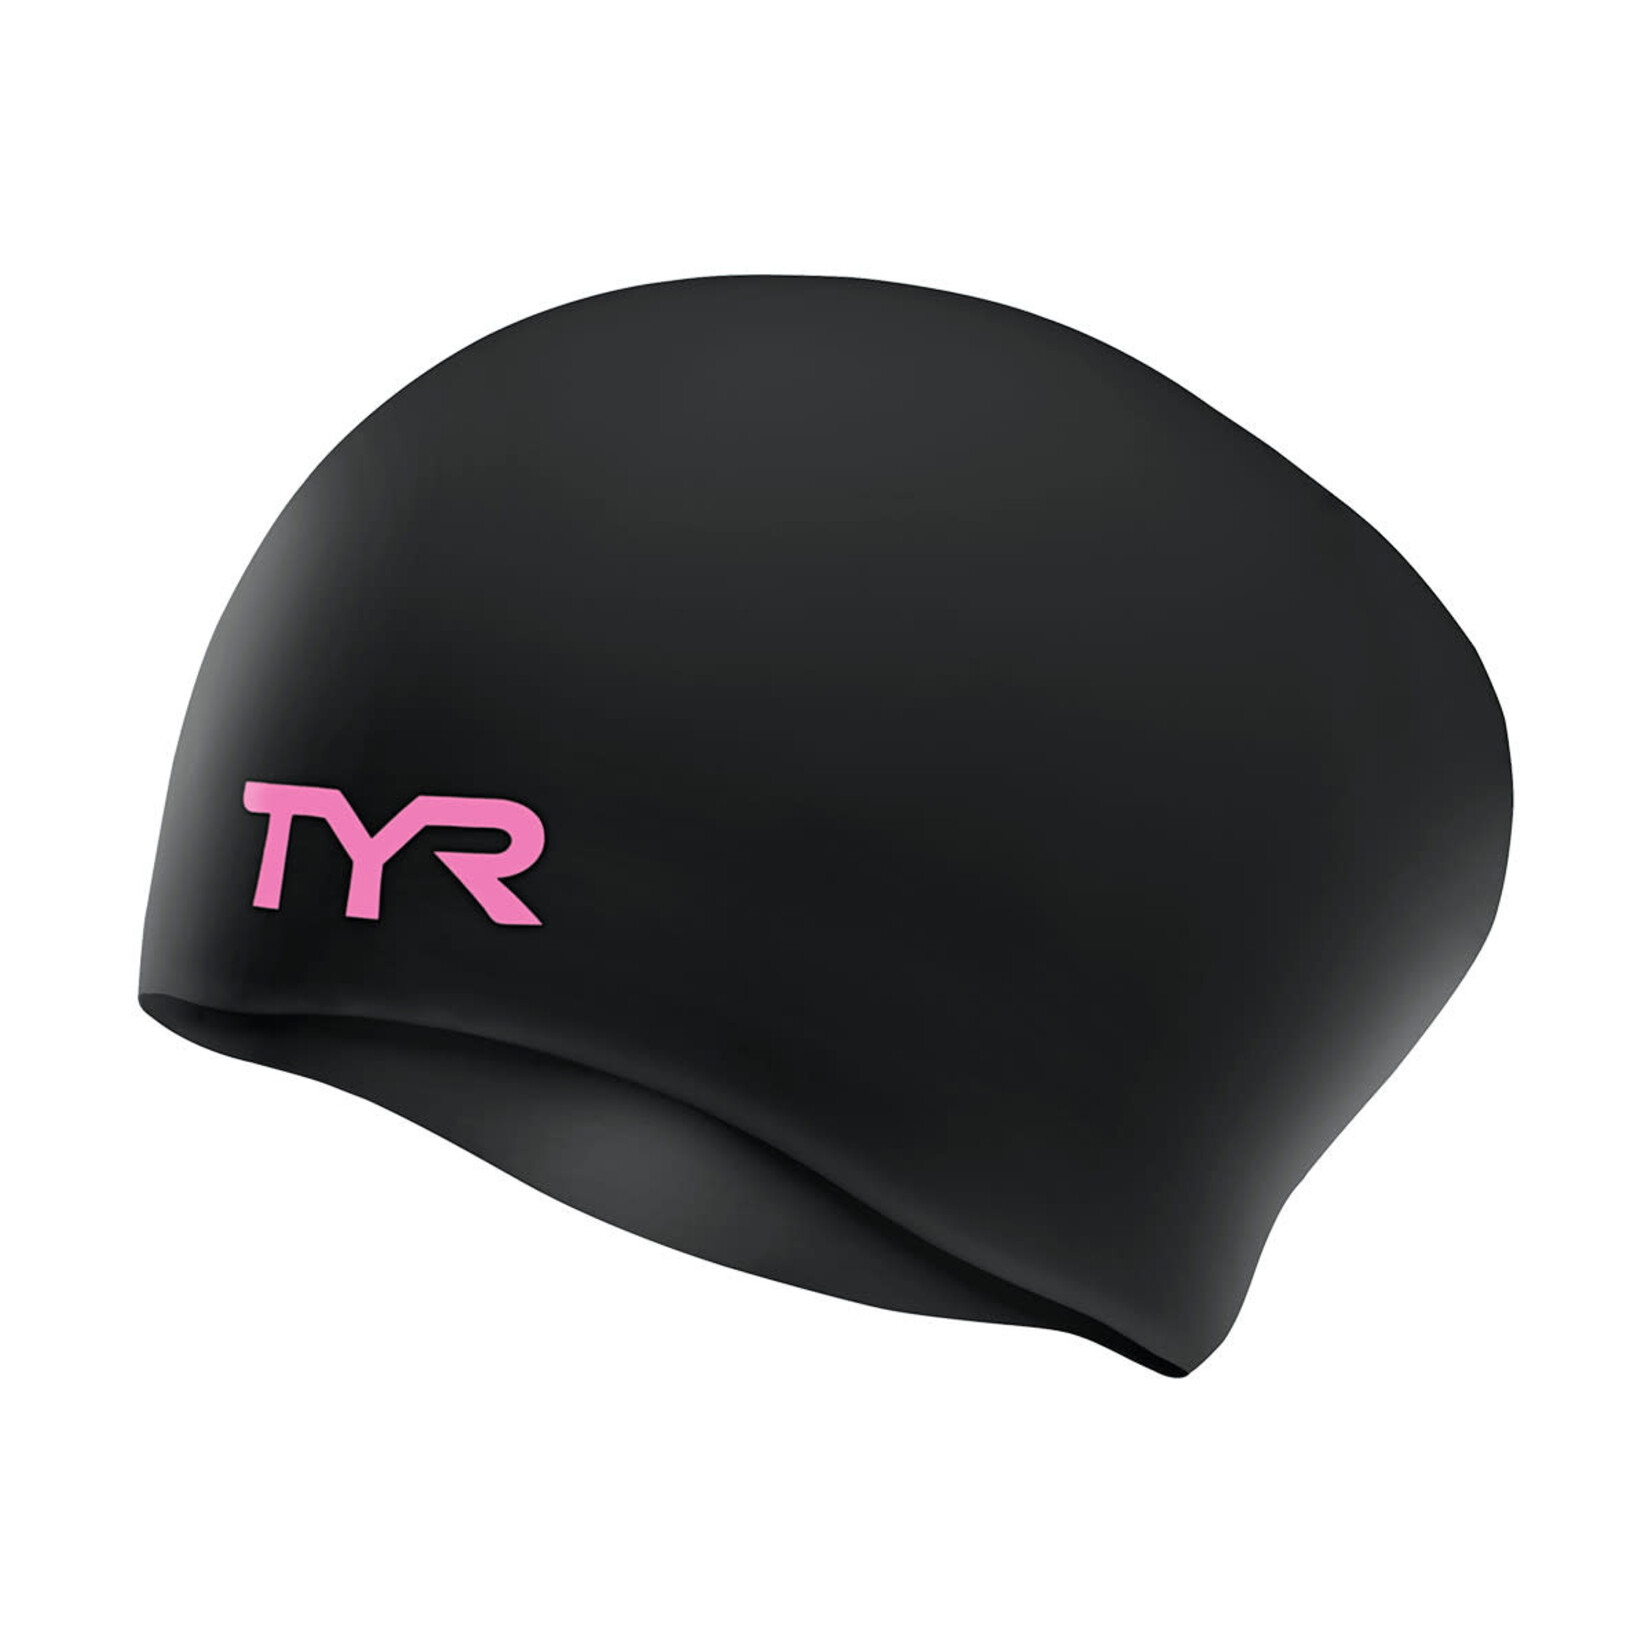 TYR TYR ADULT LONG HAIR SILICONE WRINKLE-FREE SWIM CAP - LIMITED EDITION TYR PINK